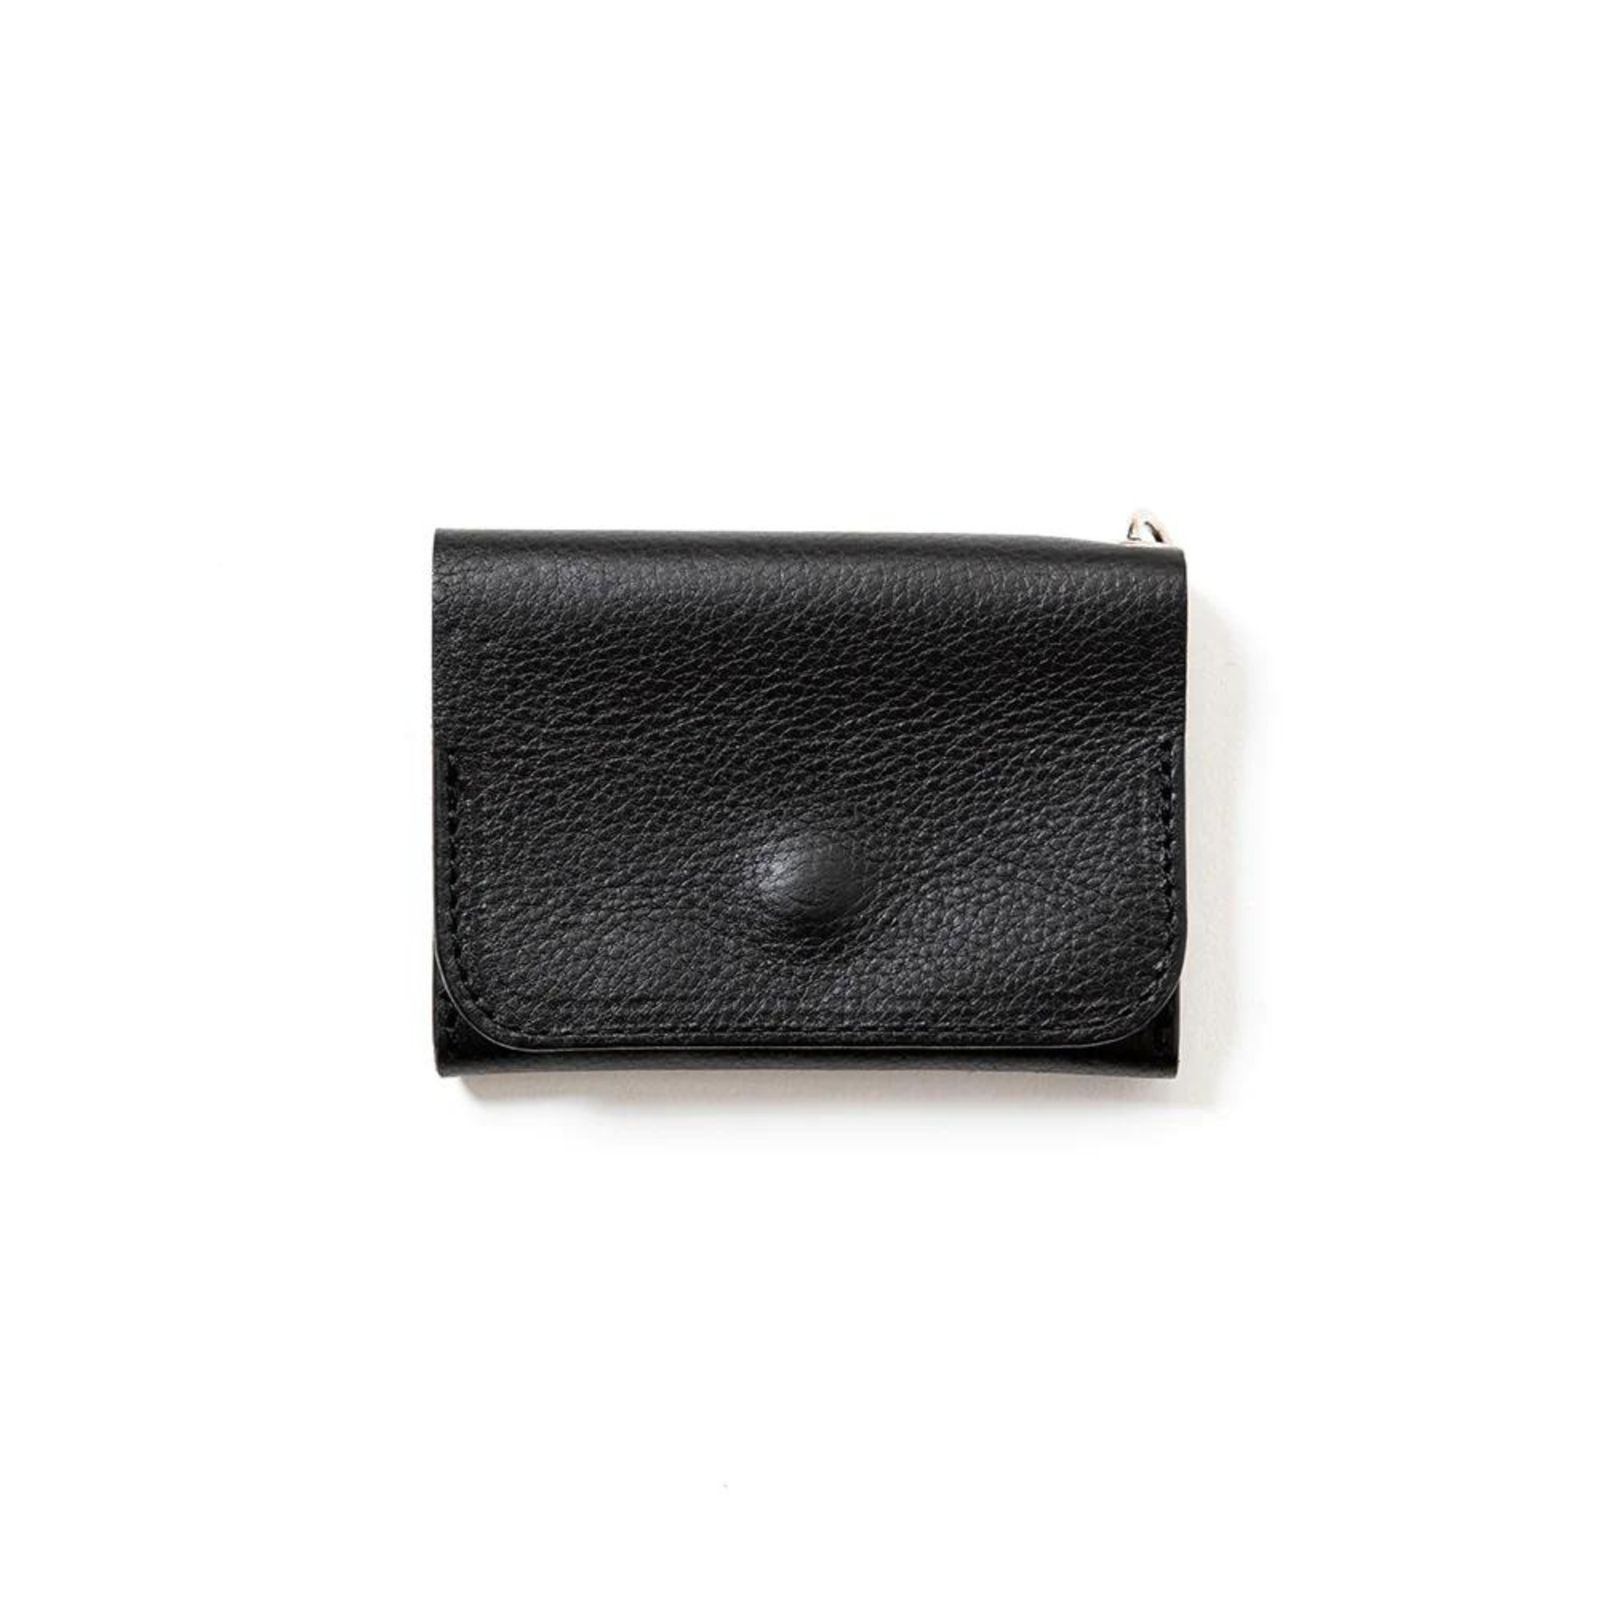 CALEE - STUDS LEATHER MULTI CASE WALLET (BLACK) / スタッズレザー マルチケースウォレット |  chord online store